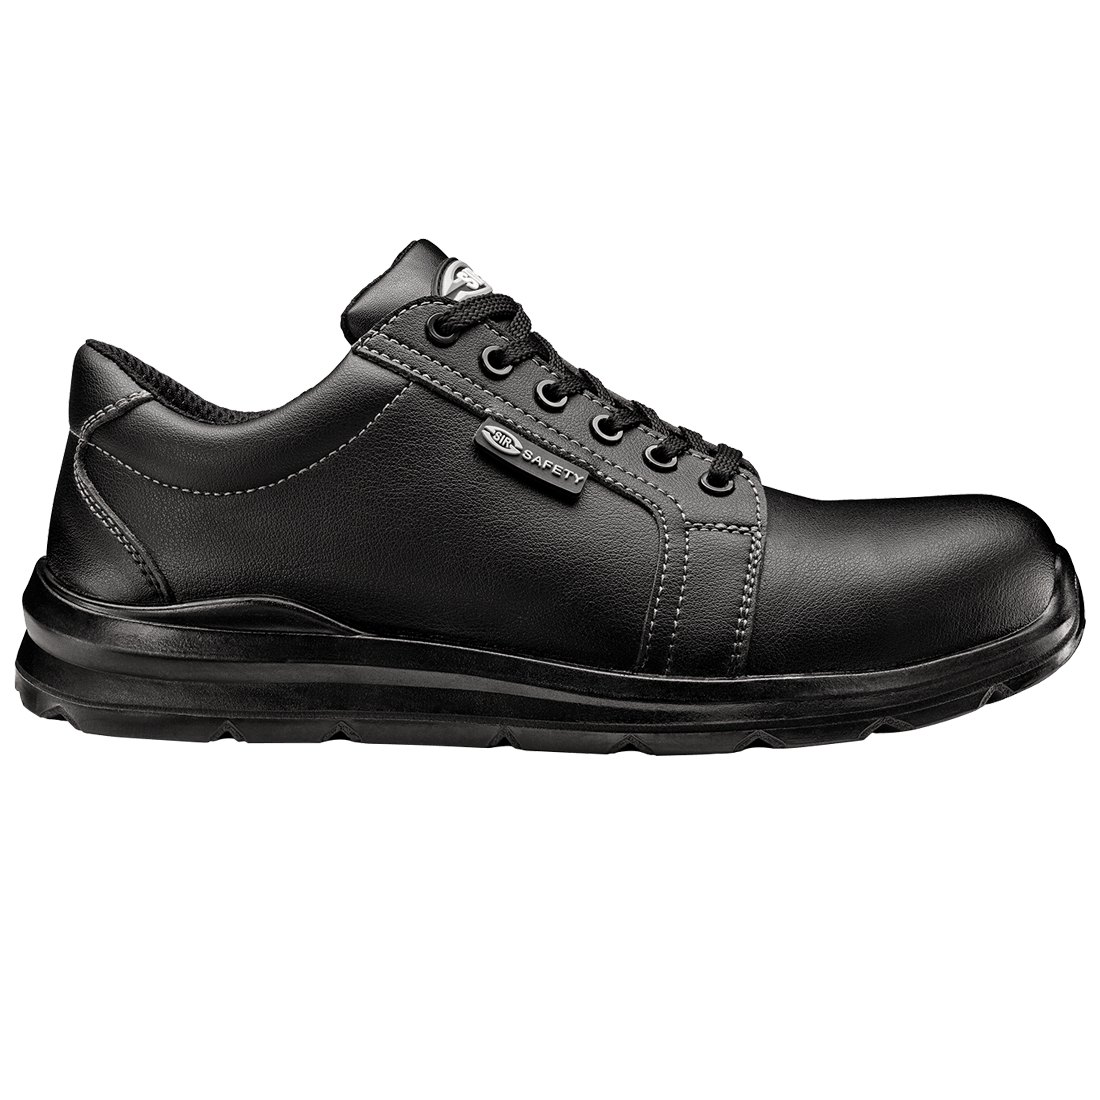 LOW BLACK FOBIA SHOE | System Sir Safety